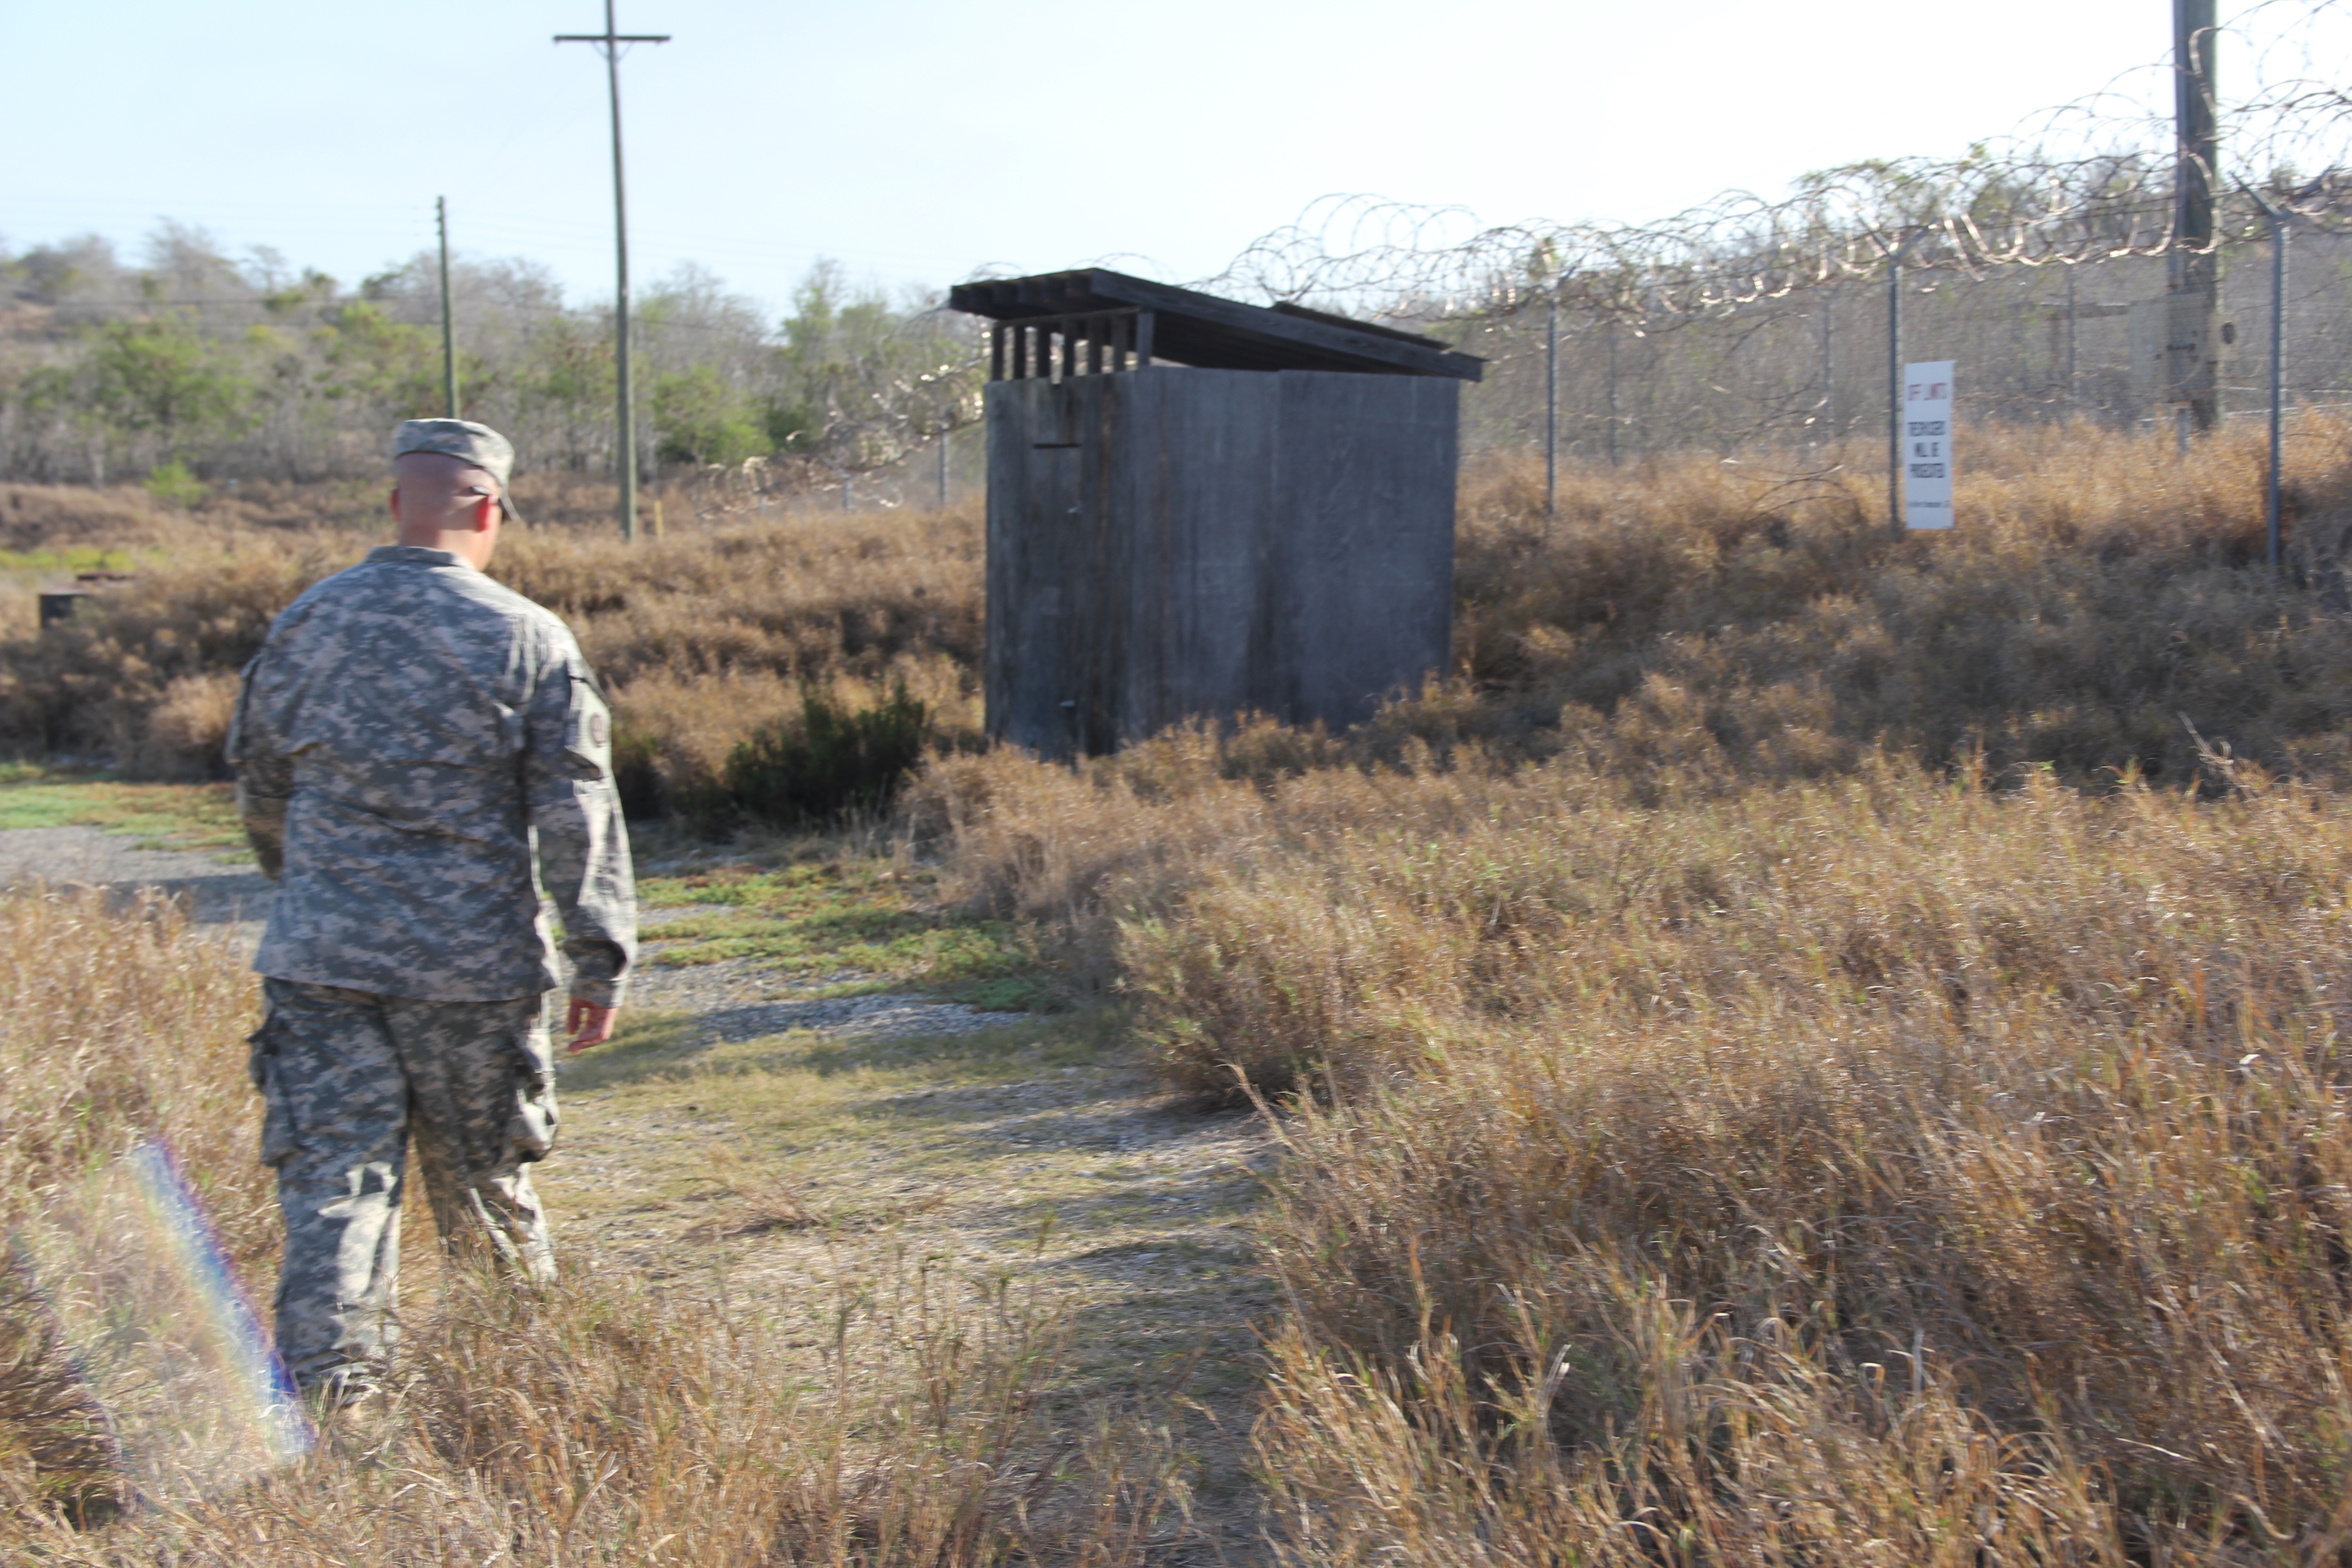 Guantanamo hearing wraps up with more delays